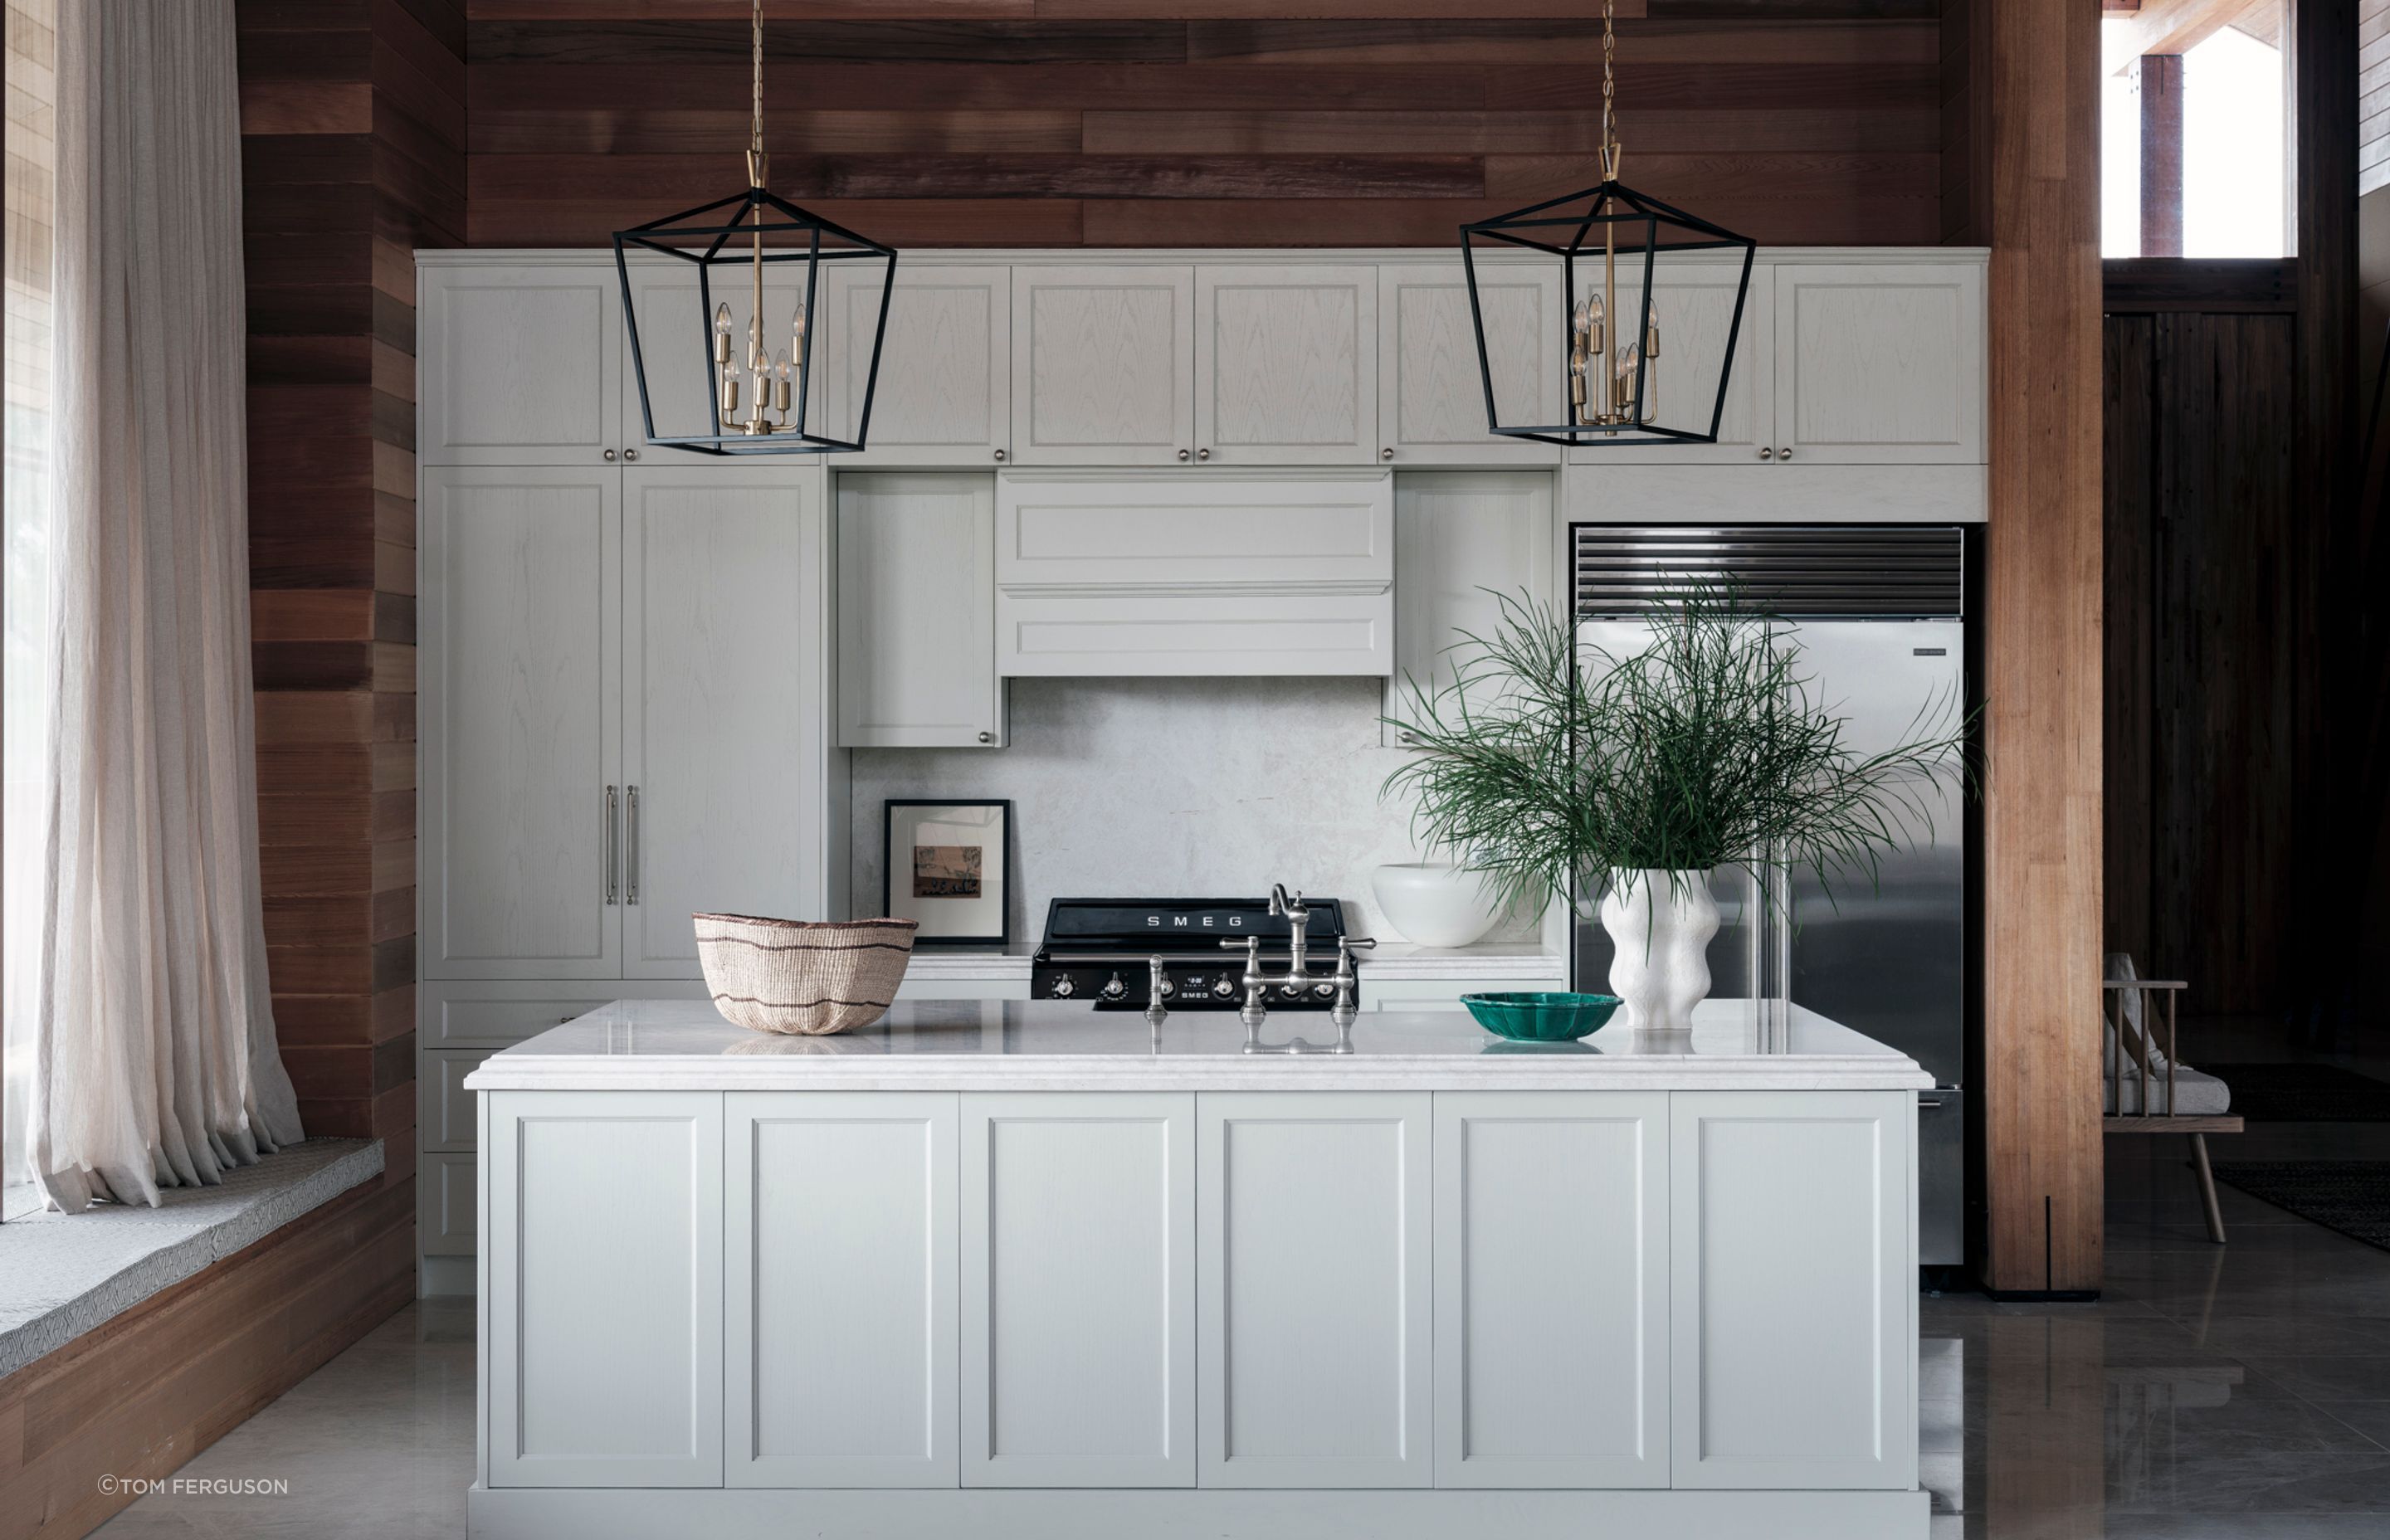 A contrast to the cedar, the kitchen cabinetry is solid oak, hand-painted in white. The orientation of the island bench allows those preparing dinner to look out over the space and still be involved in conversation.